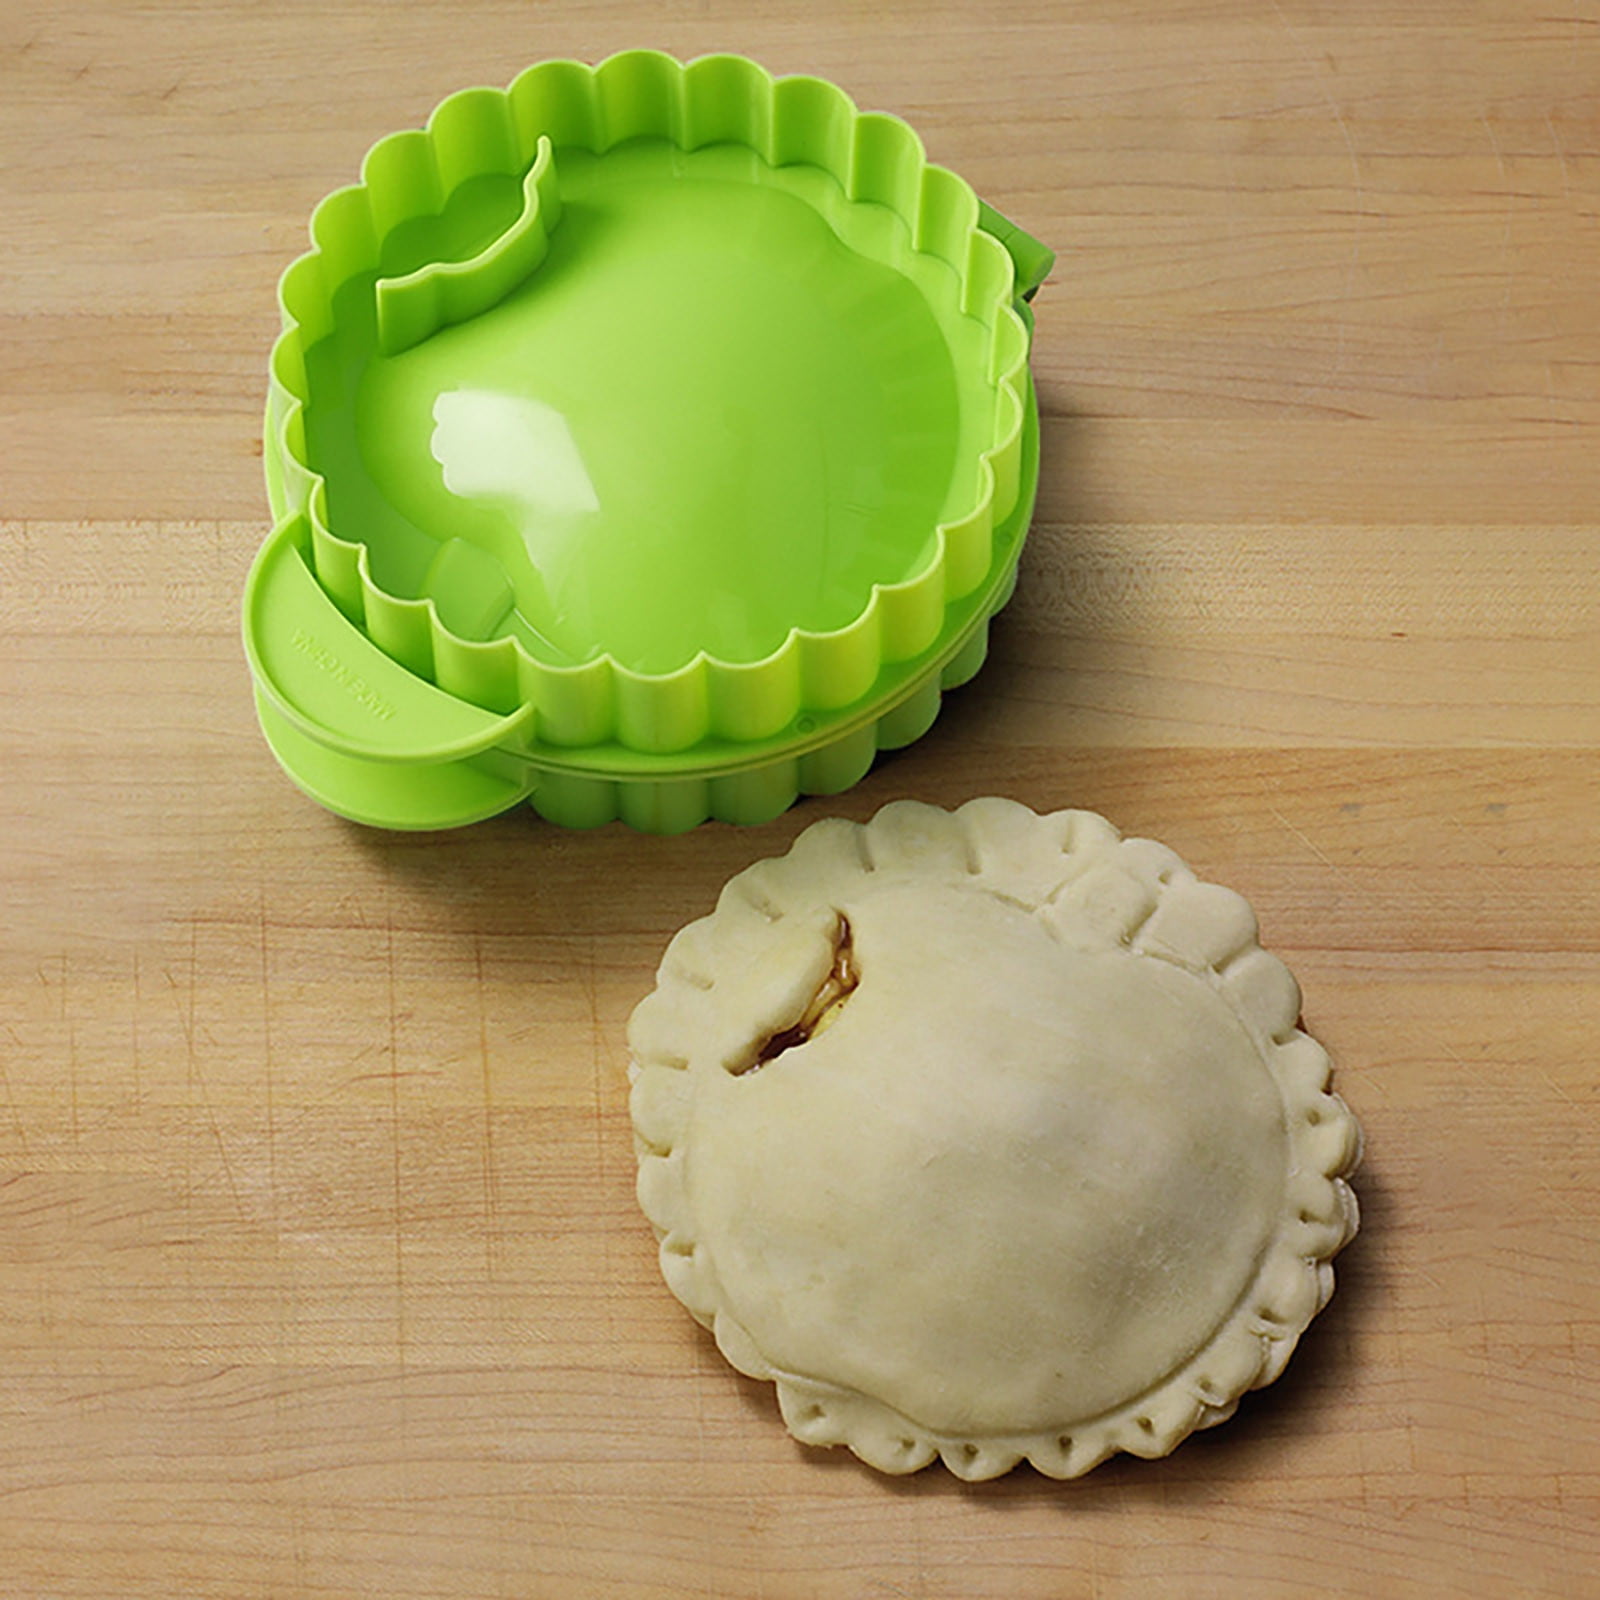 New Mini Pie Maker Colored Red 350W with Dough Cutter By DASH